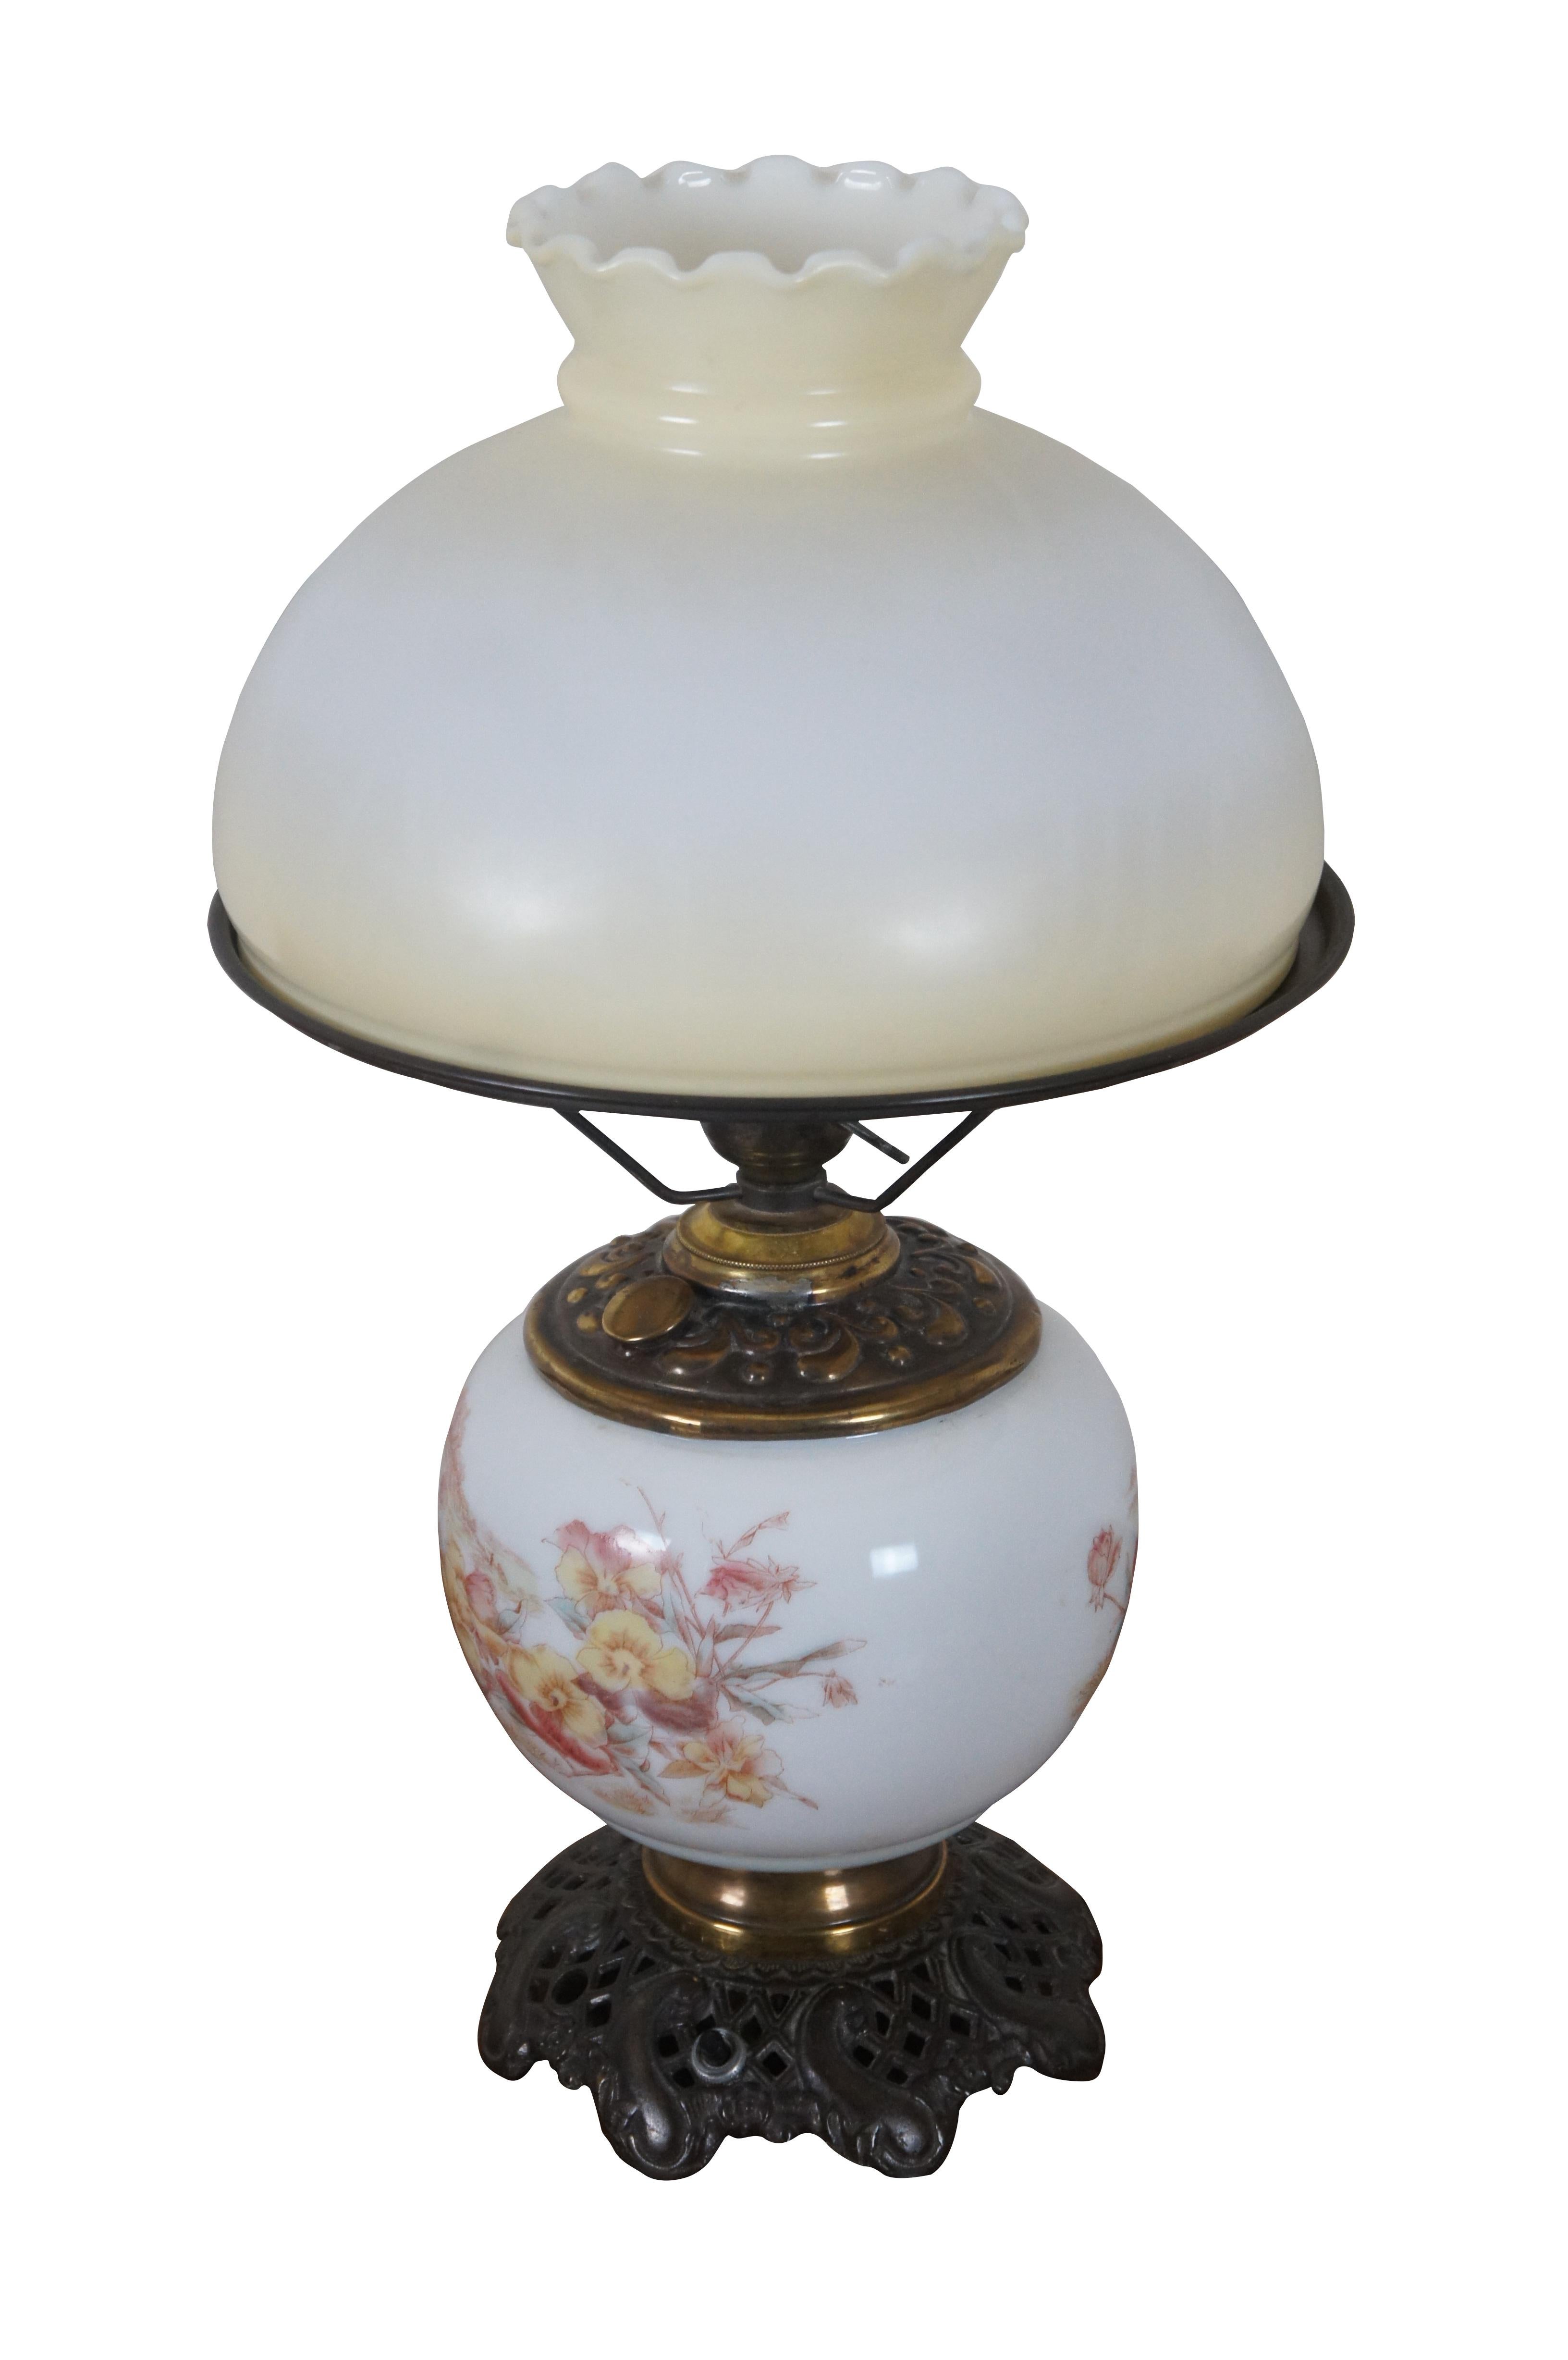 Antique Gone with the Wind oil lamp (converted to electric) featuring a lightly tinted, ruffled top, milk glass shade, and a milk glass reservoir printed with pink and yellow pansies. Base marked 42. Three way switch allows upper portion and lower